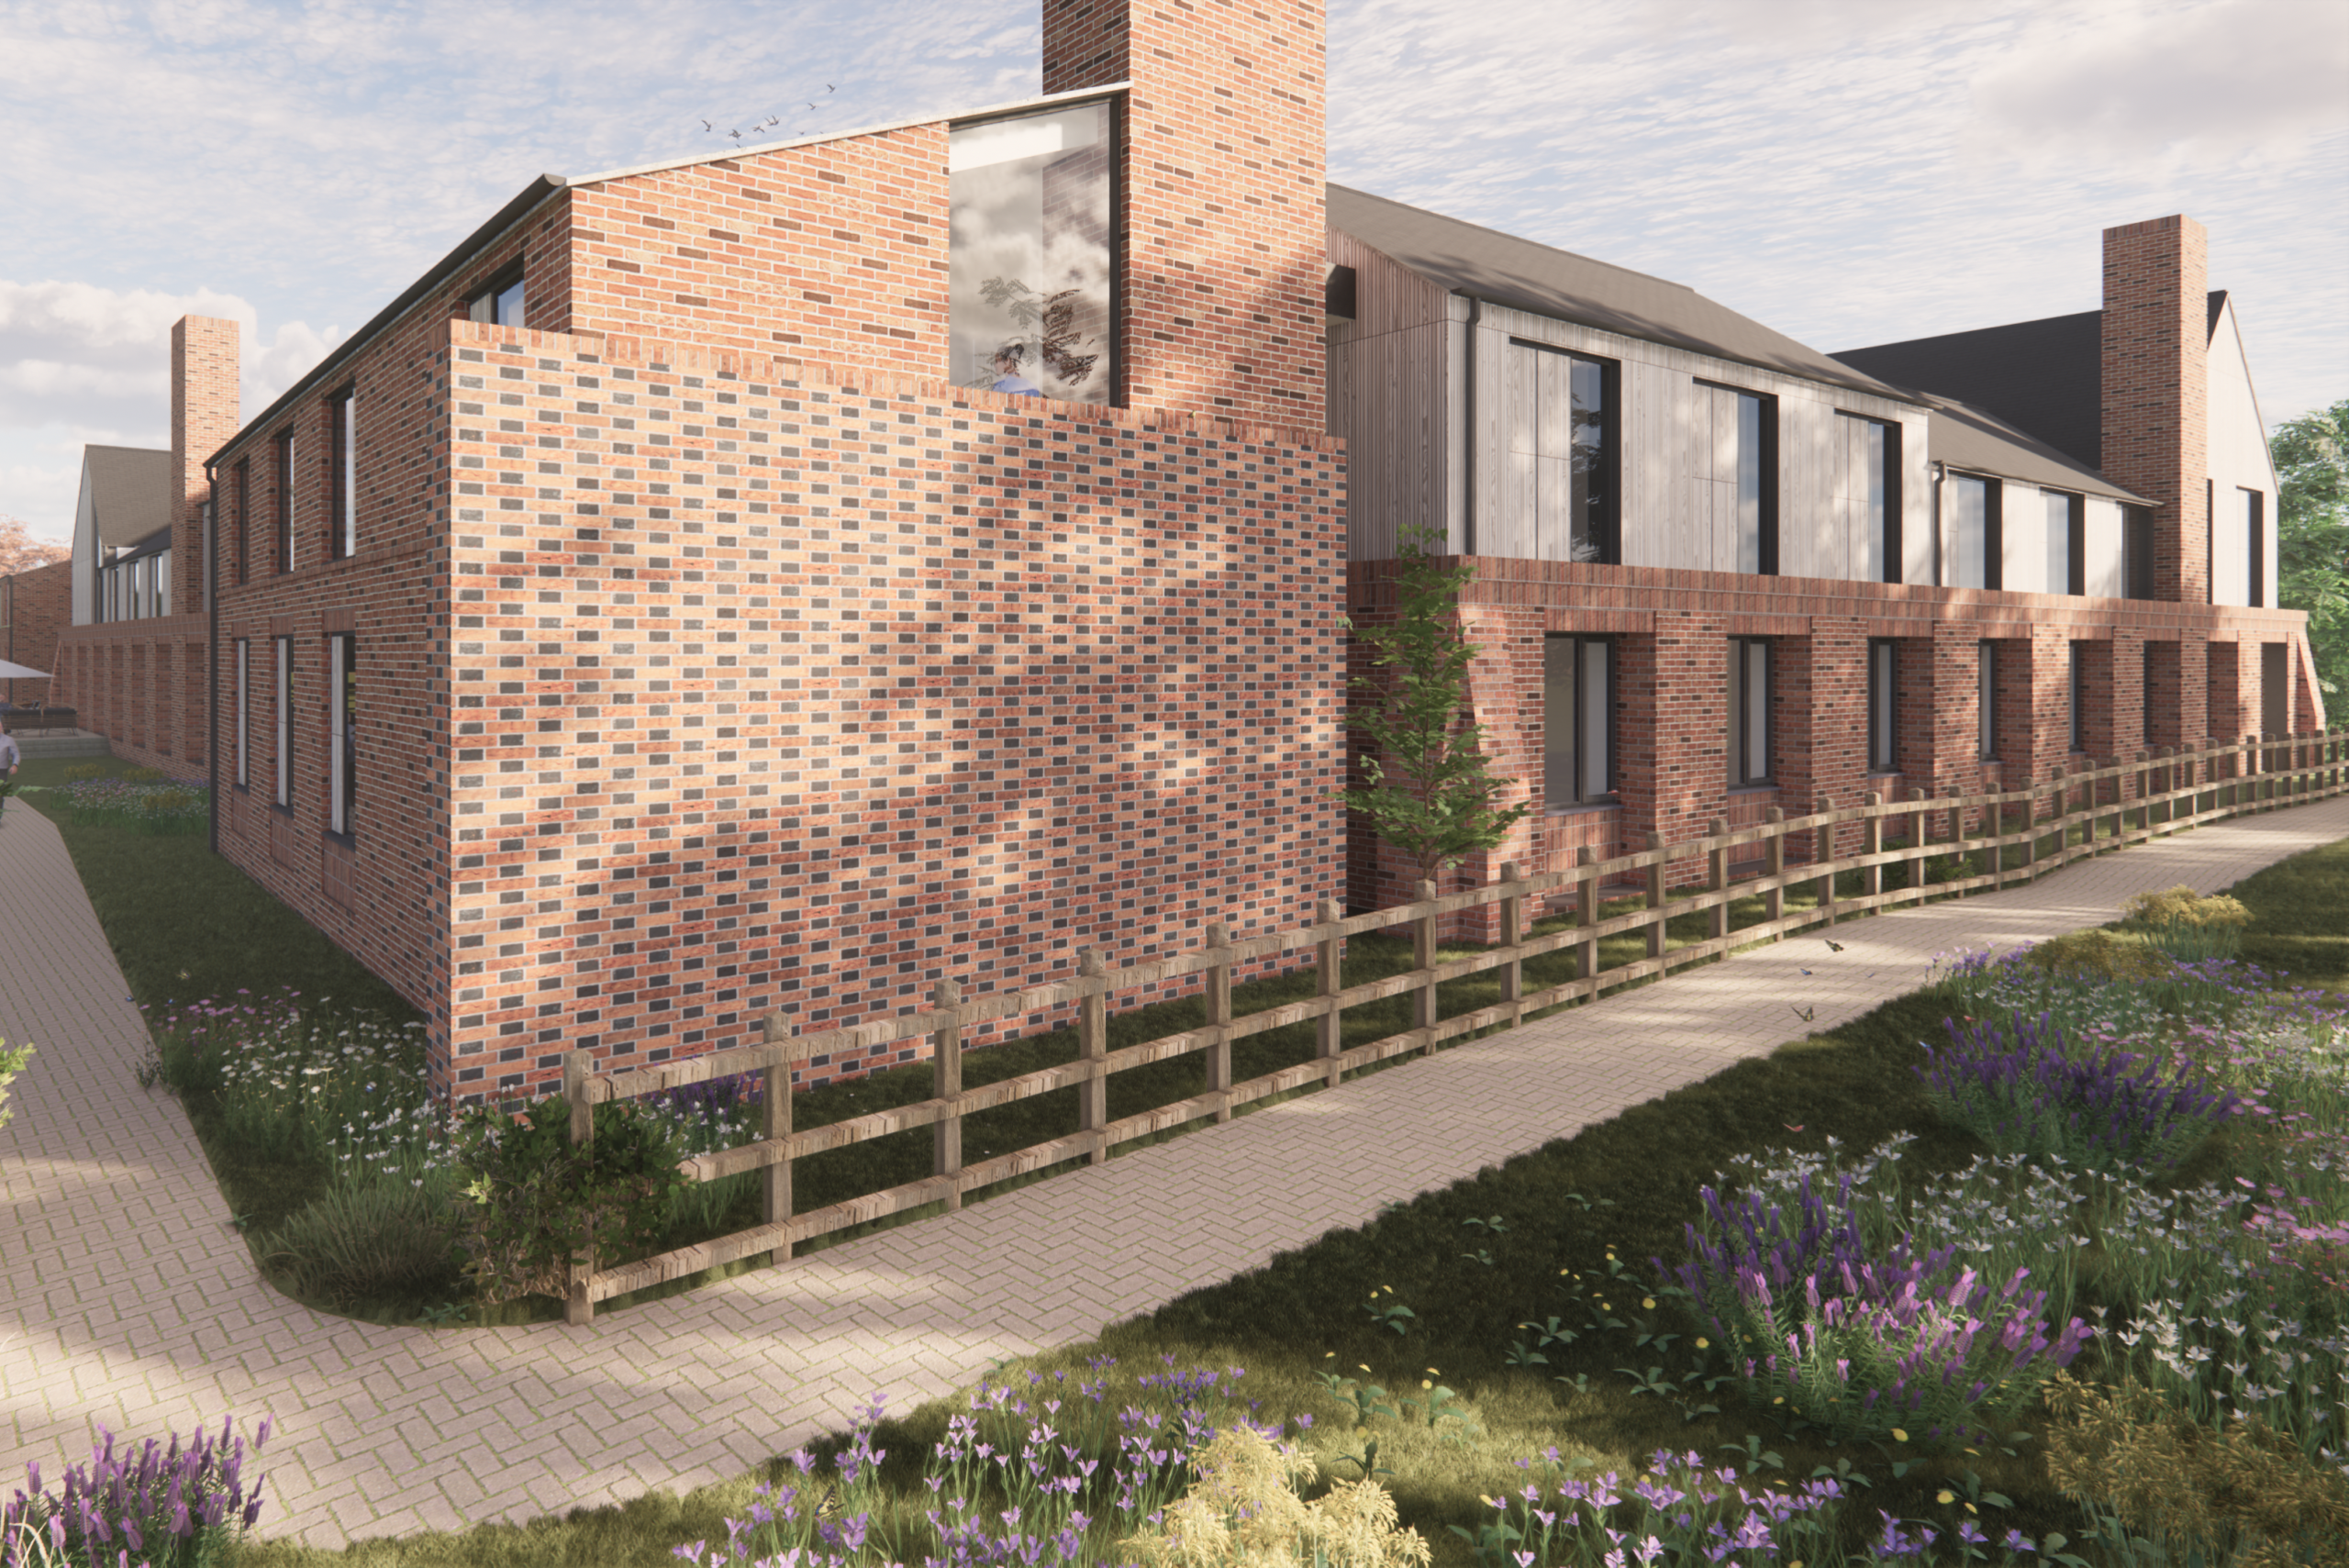 Project - Brick Works Care Home